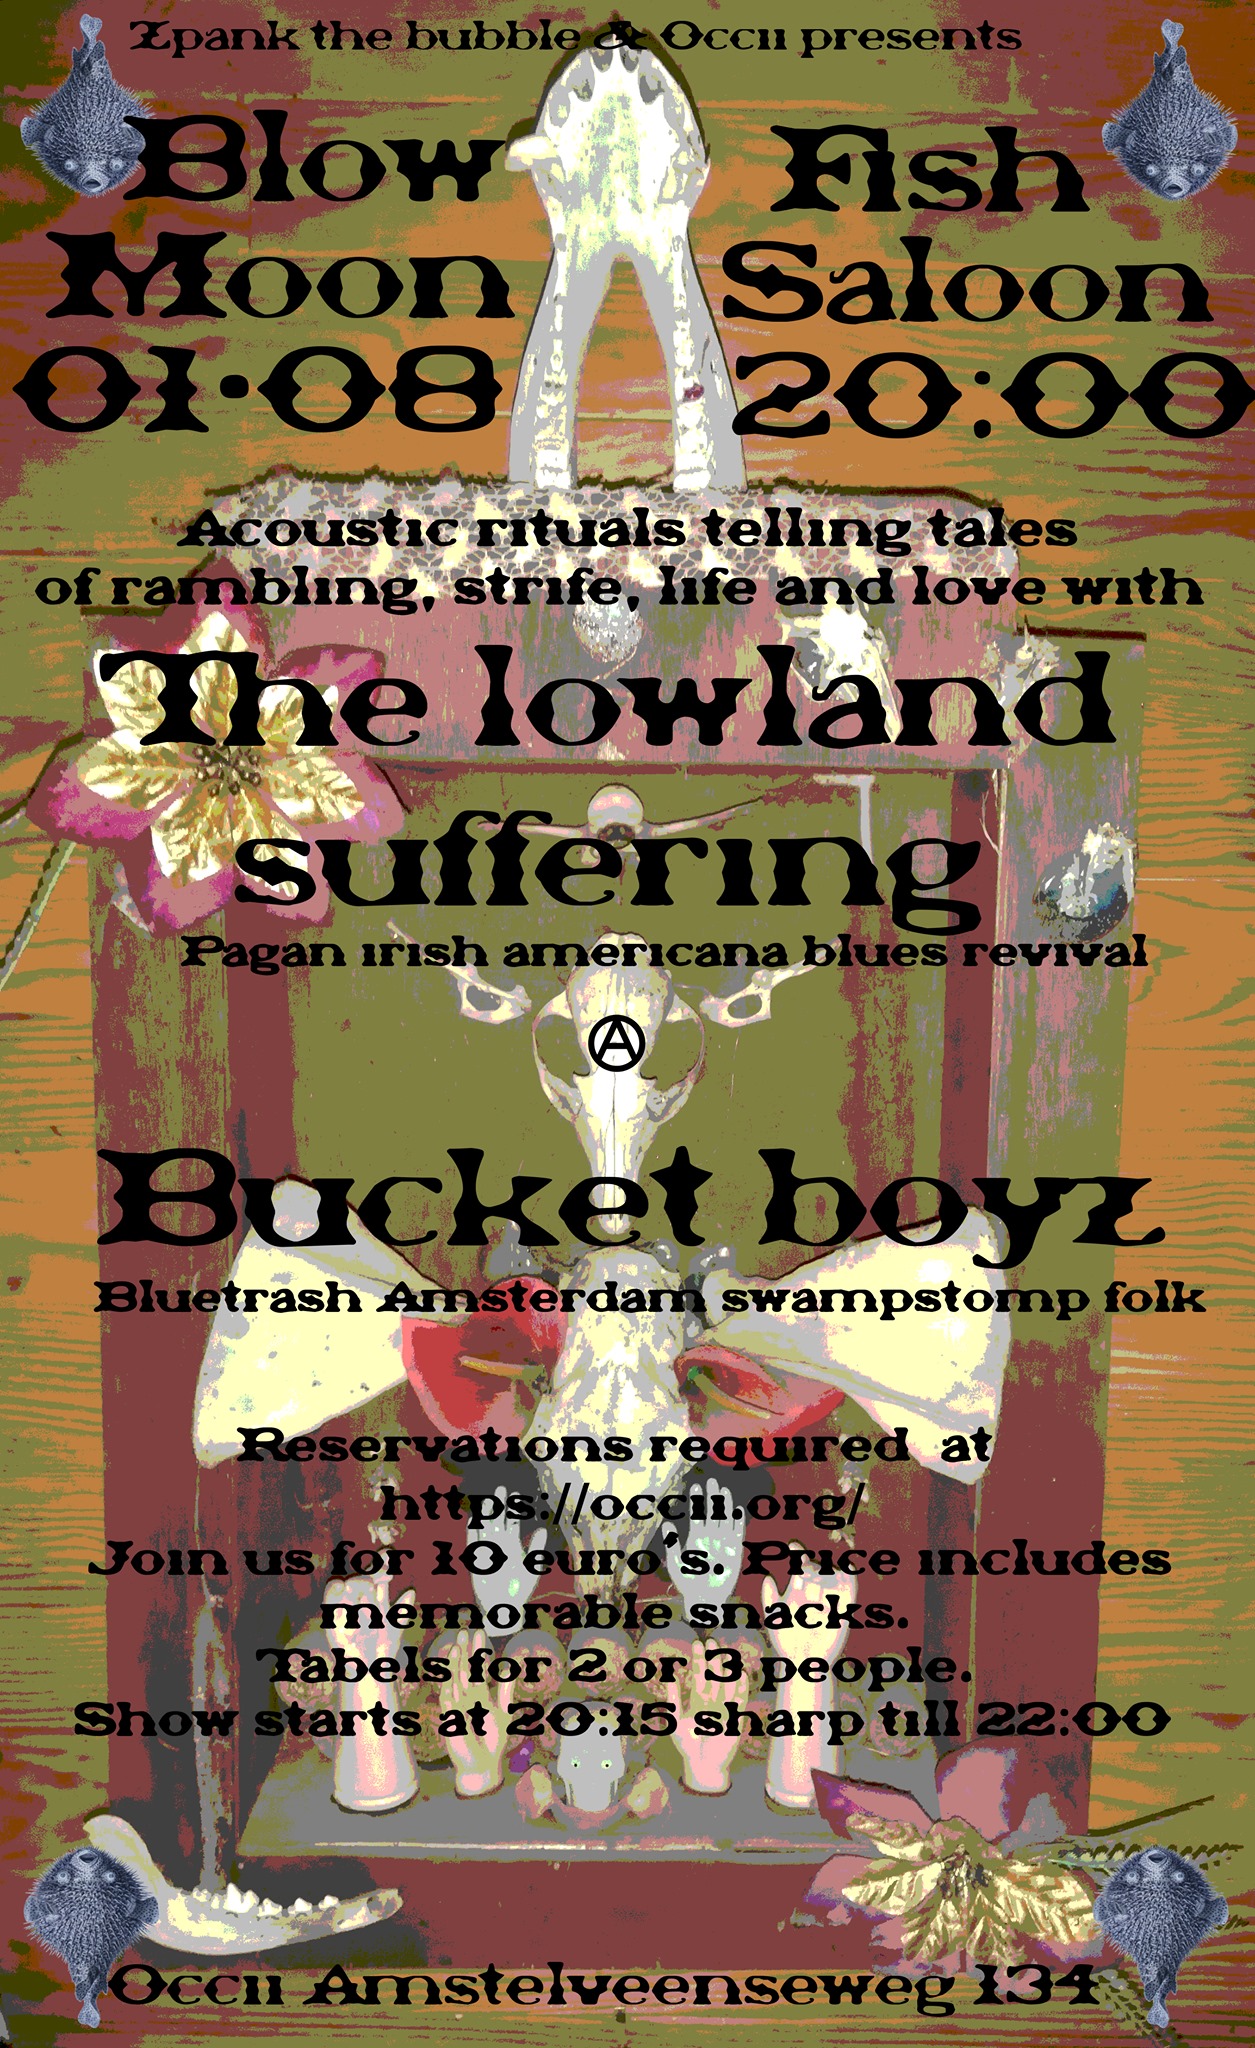 !SOLD OUT! THE LOWLAND SUFFERING + THE BUCKET BOYZ